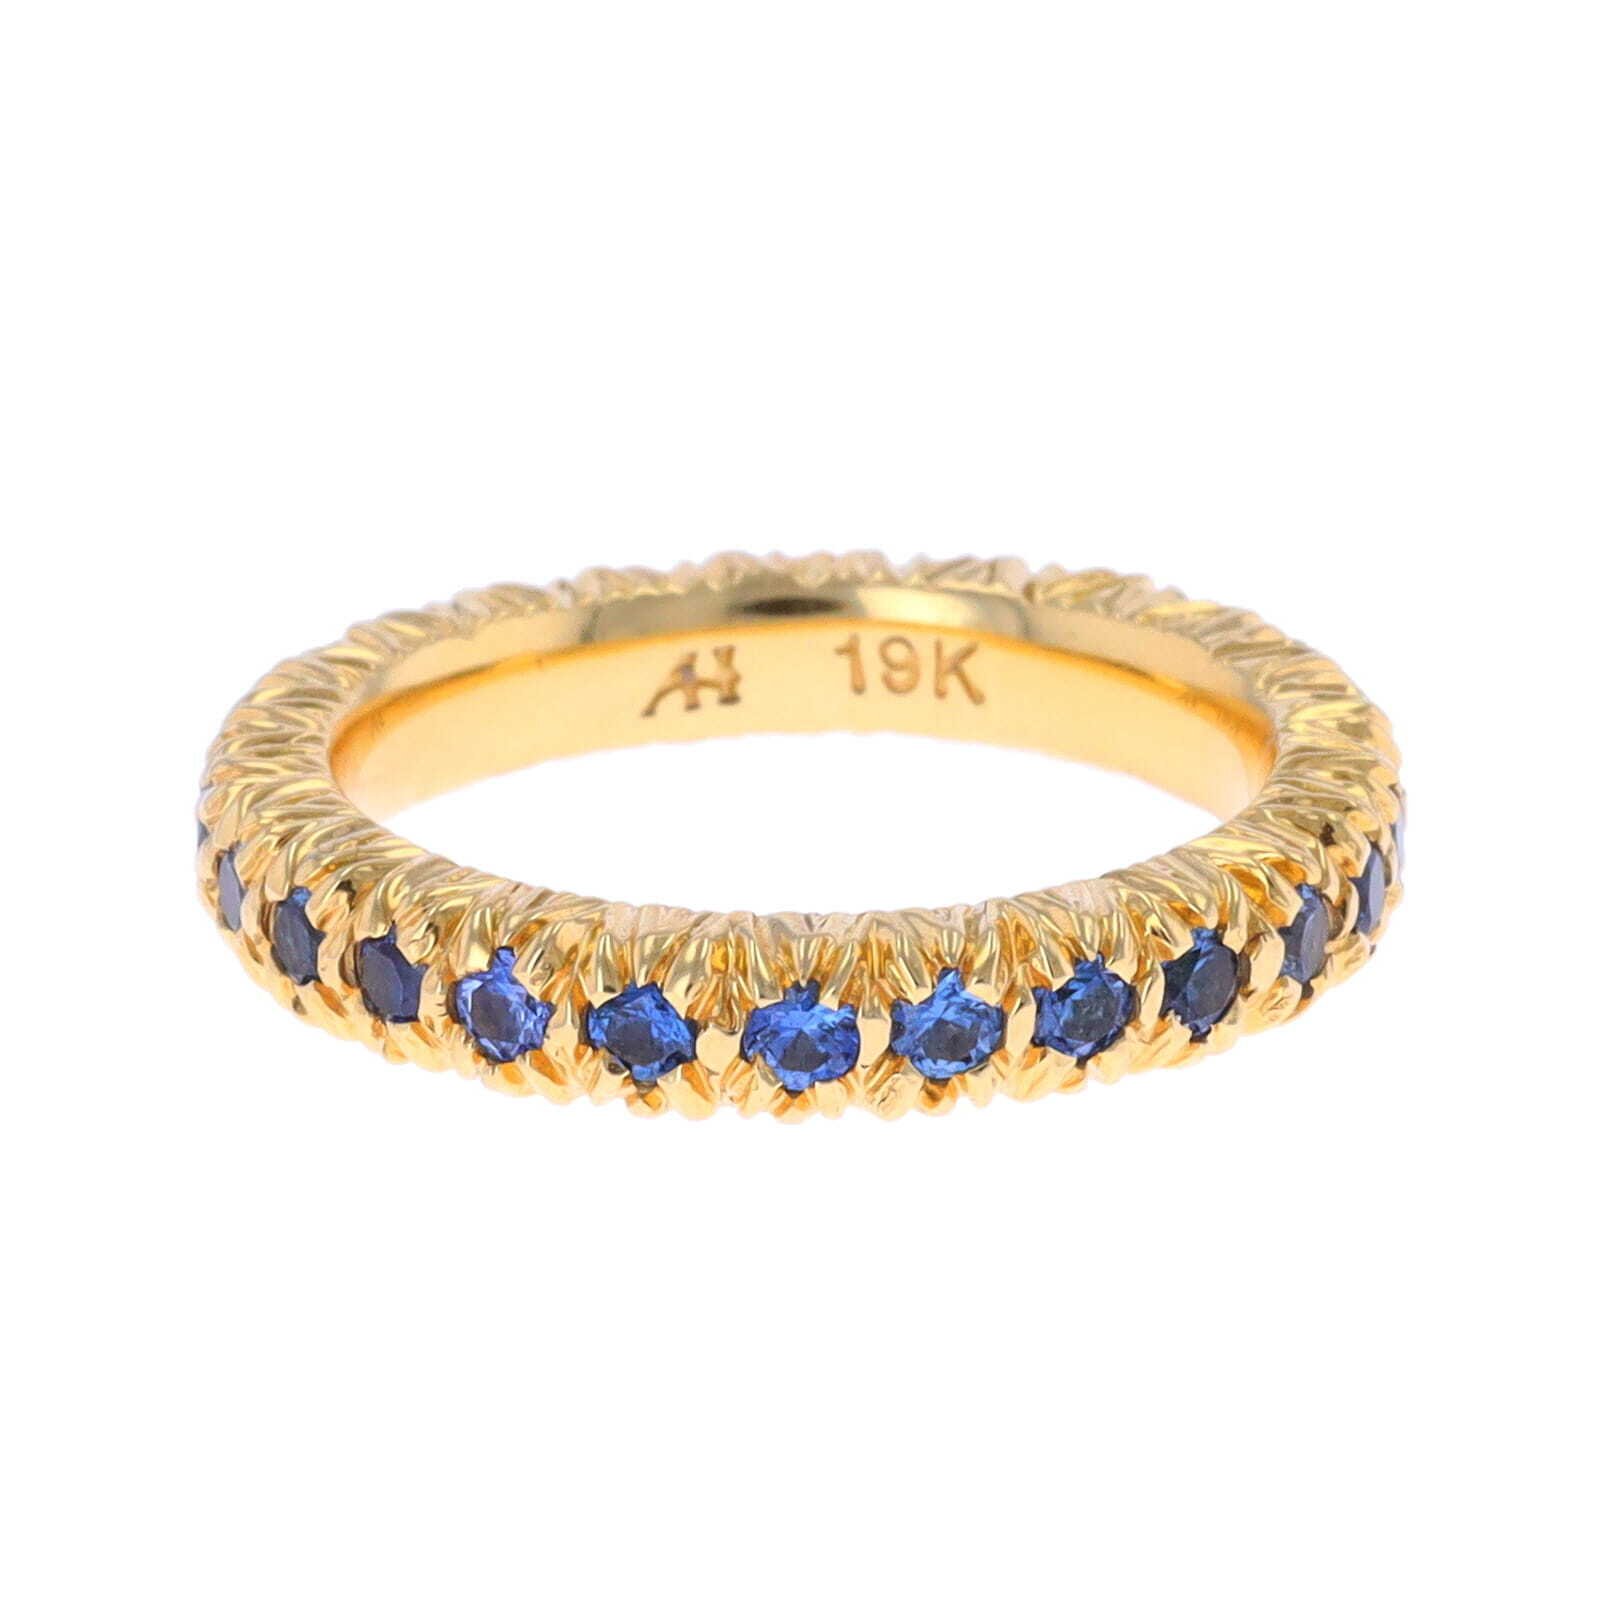 19k Sapphire Stack Ring